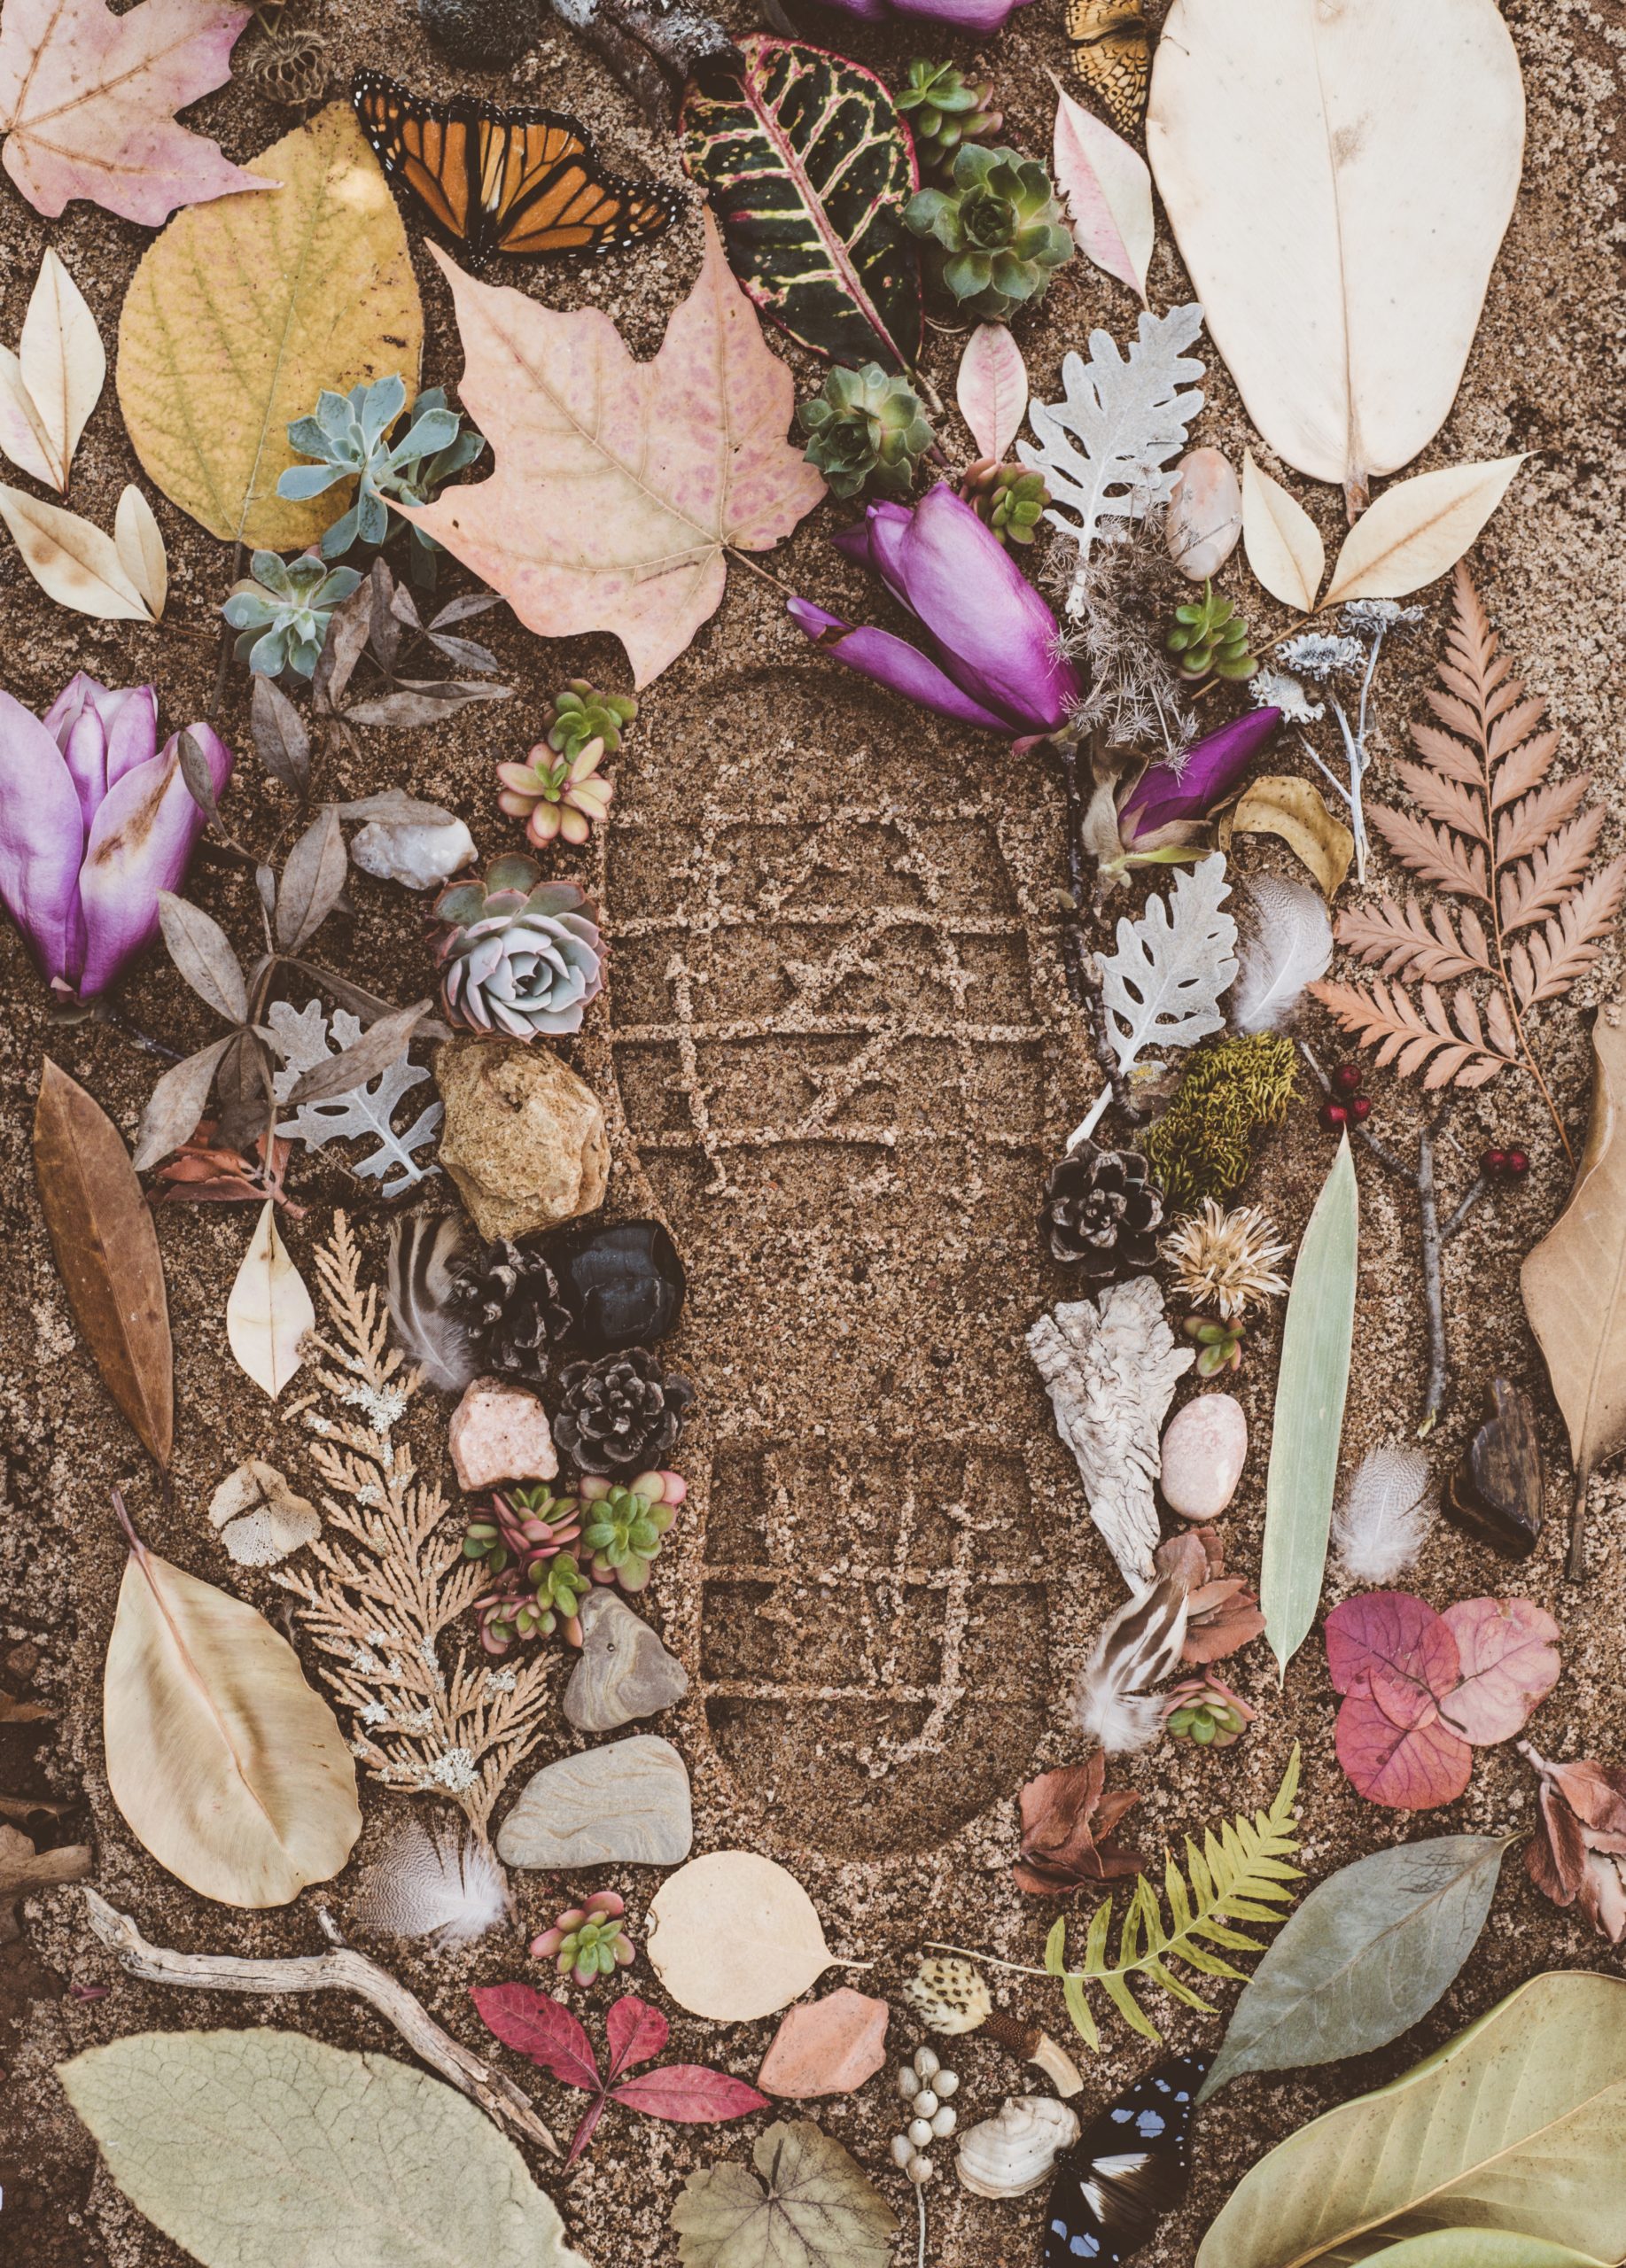 Step Into Spring a virtual assistant blog. The image is of a footprint amongst leaves